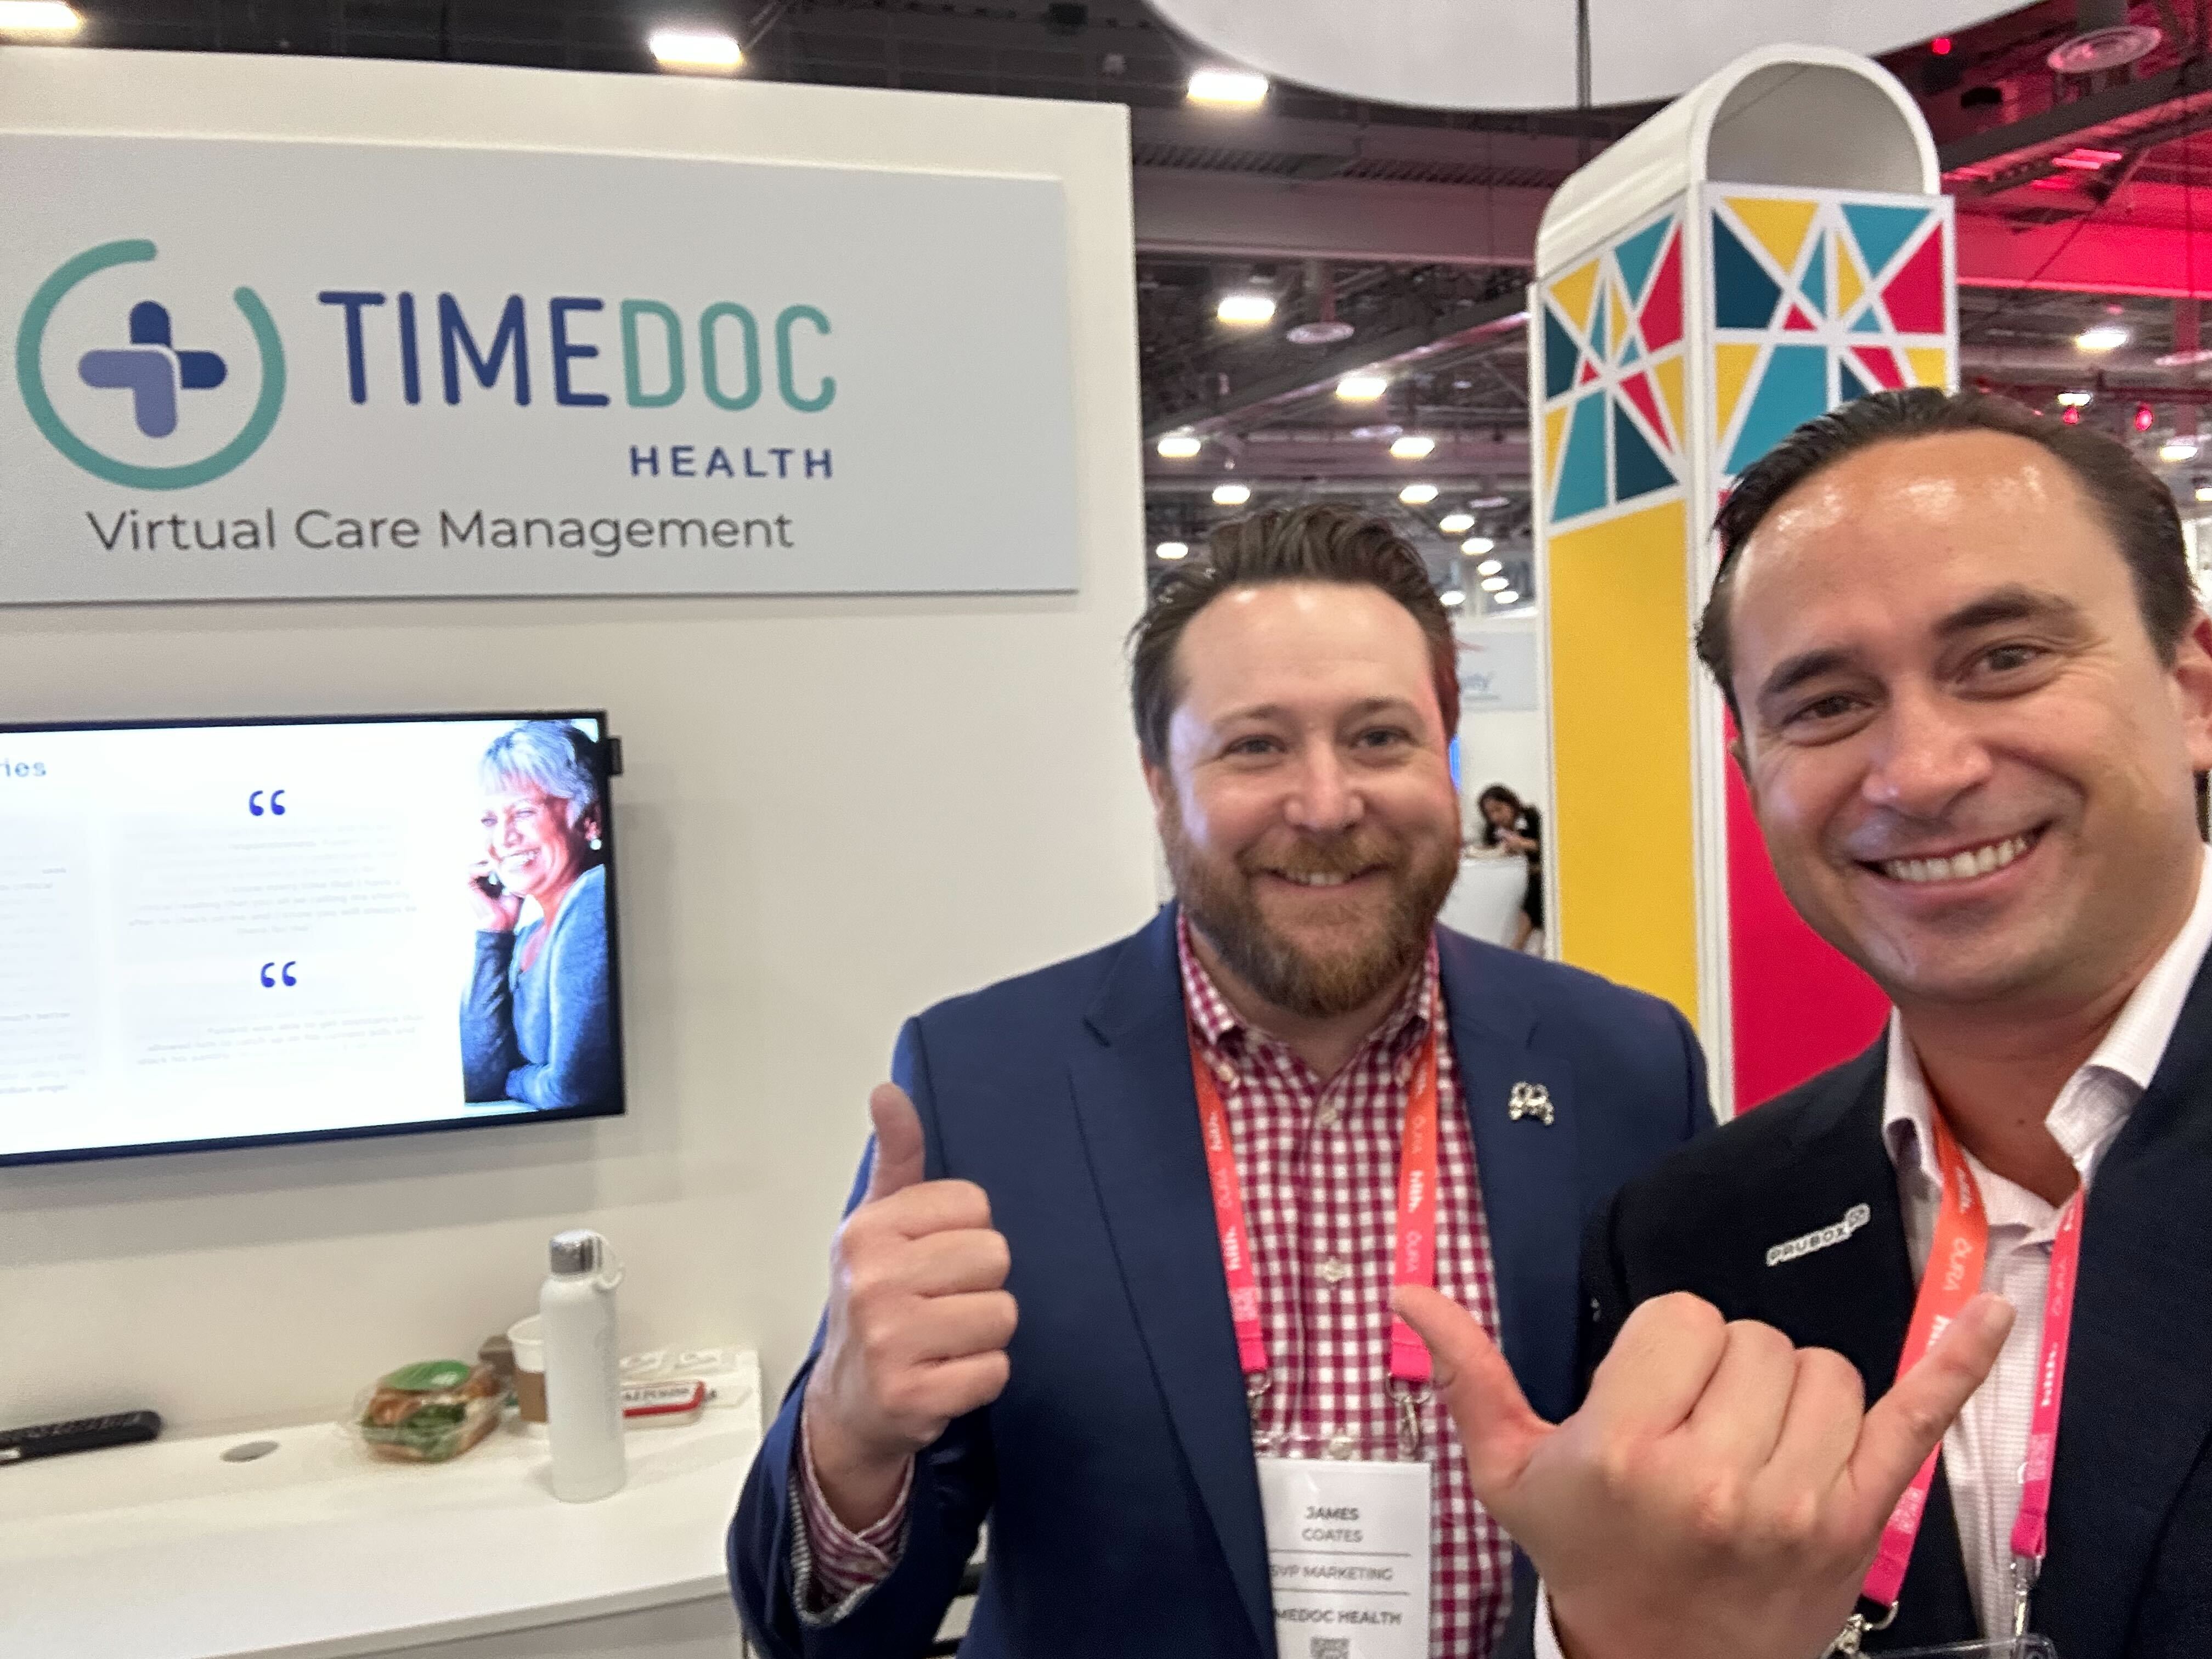 Nice to meet James Coates (SVP Marketing, TimeDoc Health) at their booth